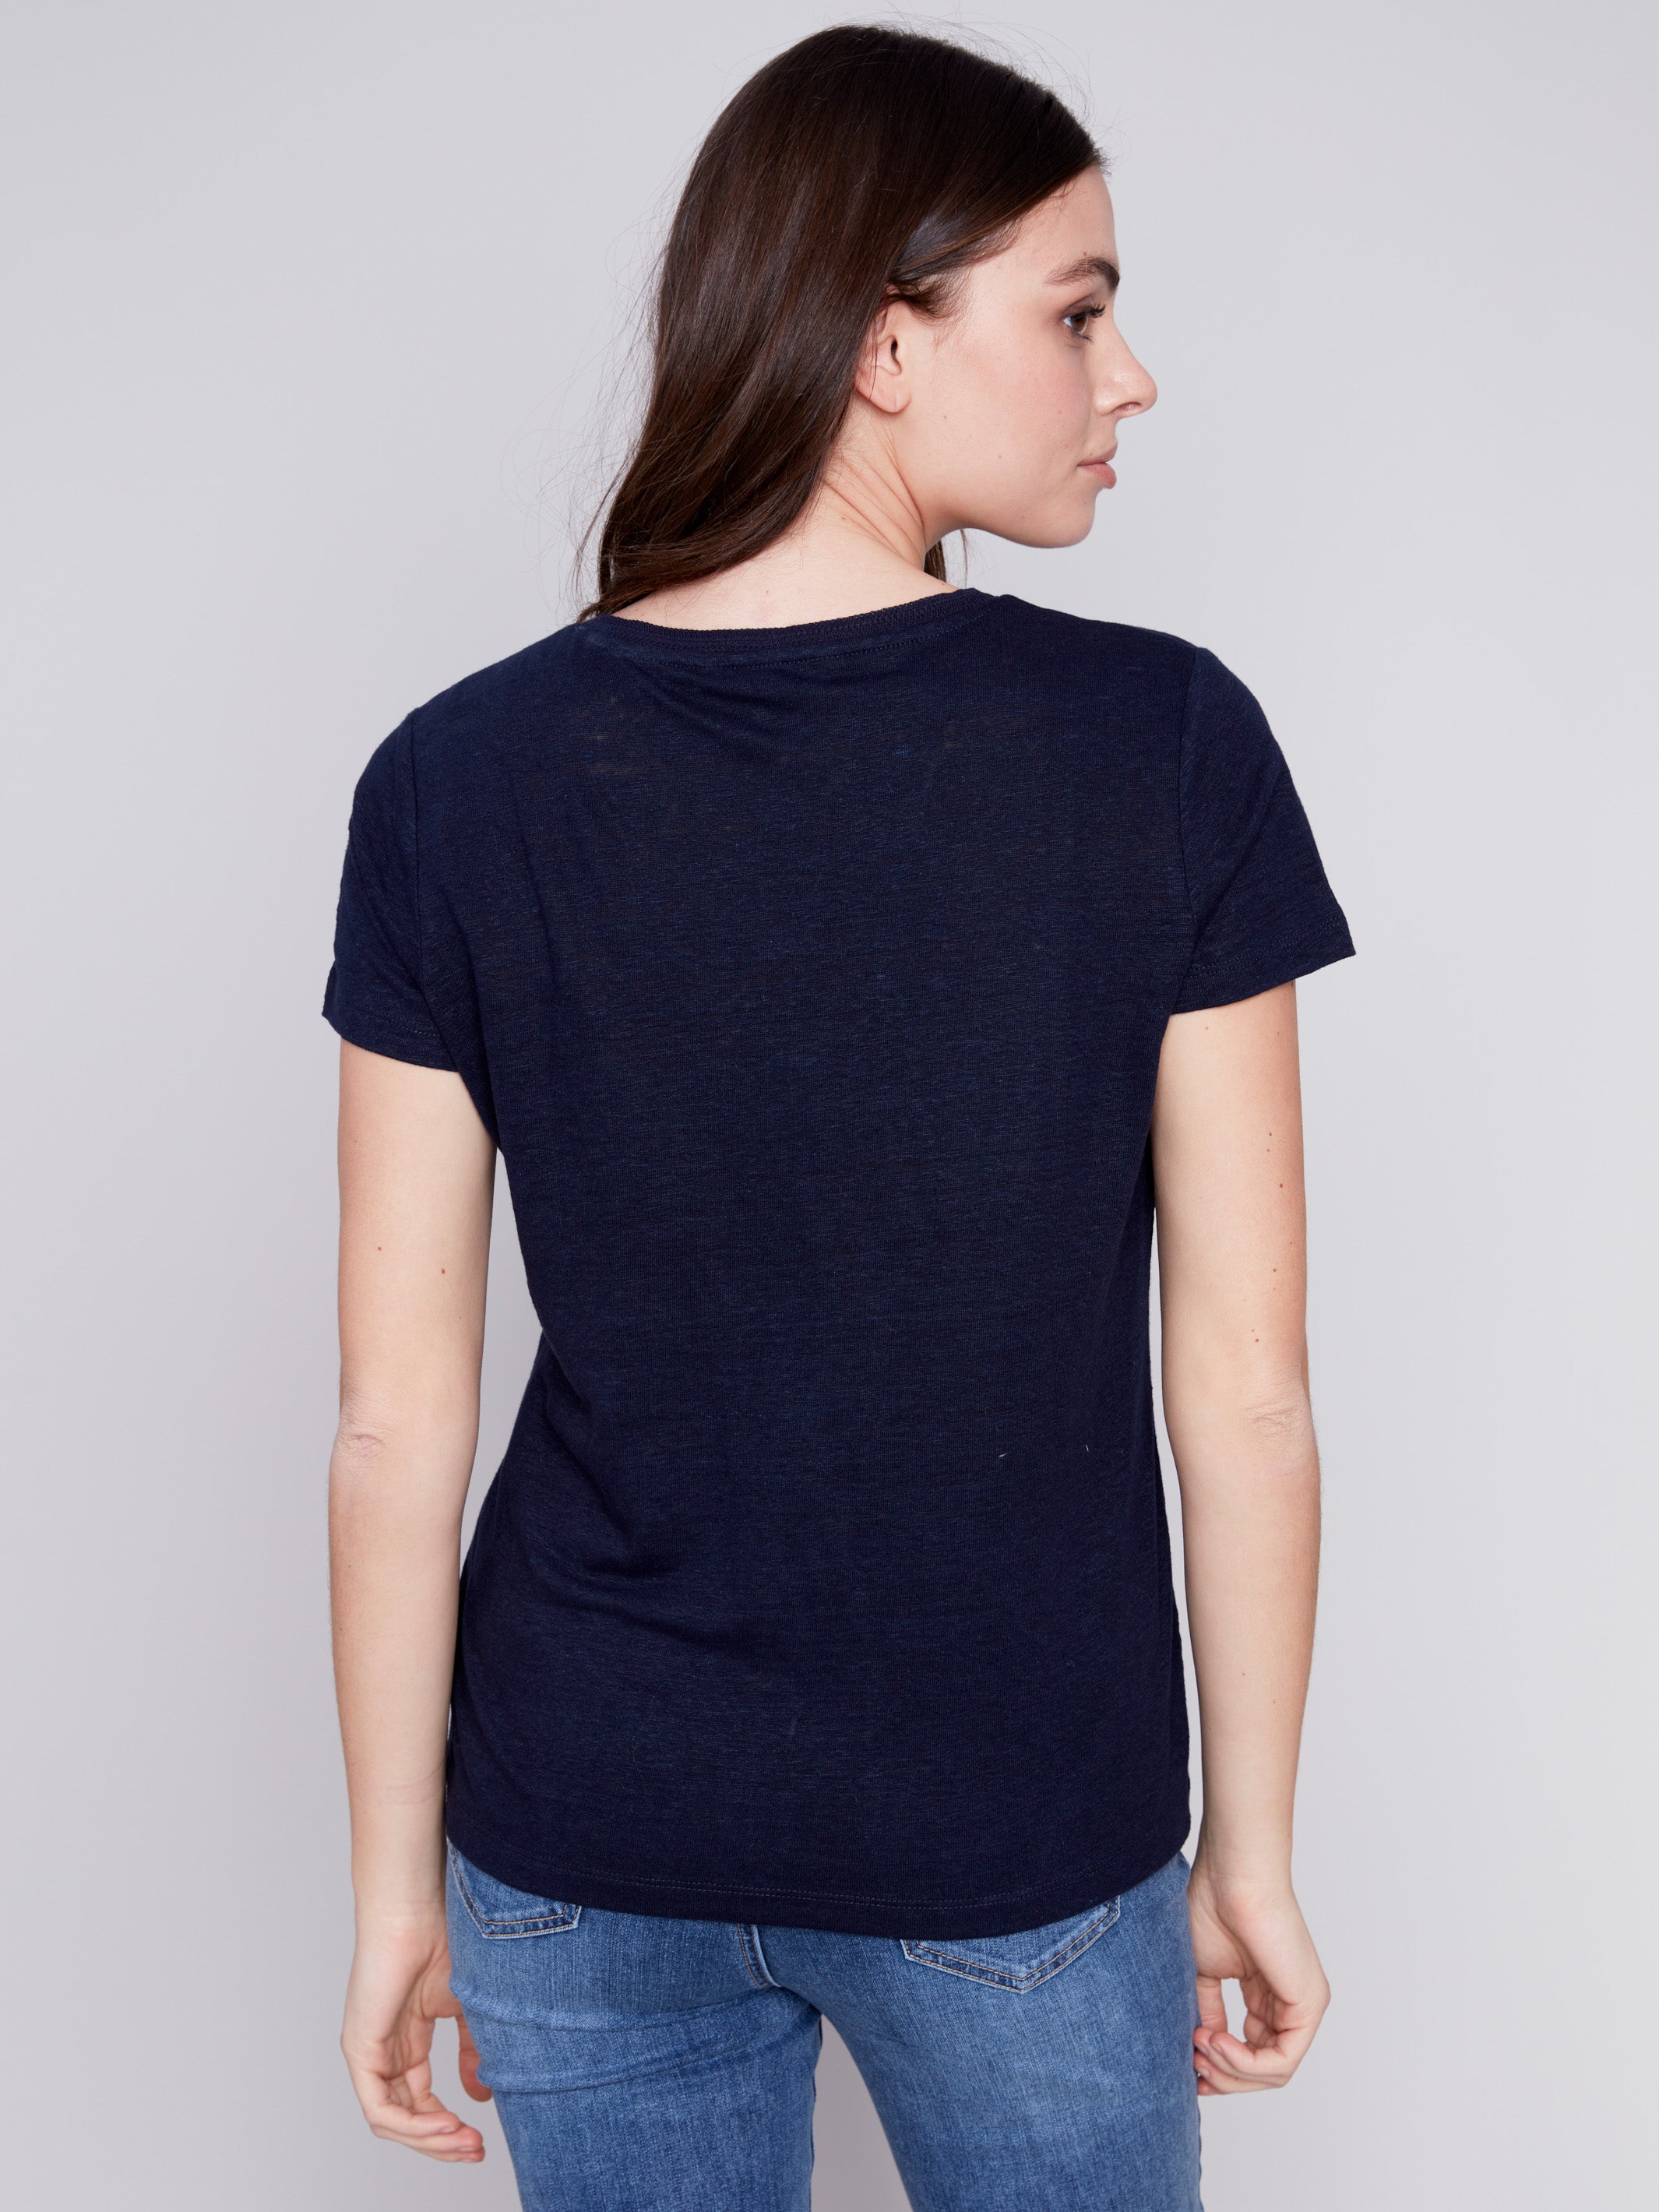 V-Neck Linen T-Shirt - Navy - Charlie B Collection Canada - Image 2